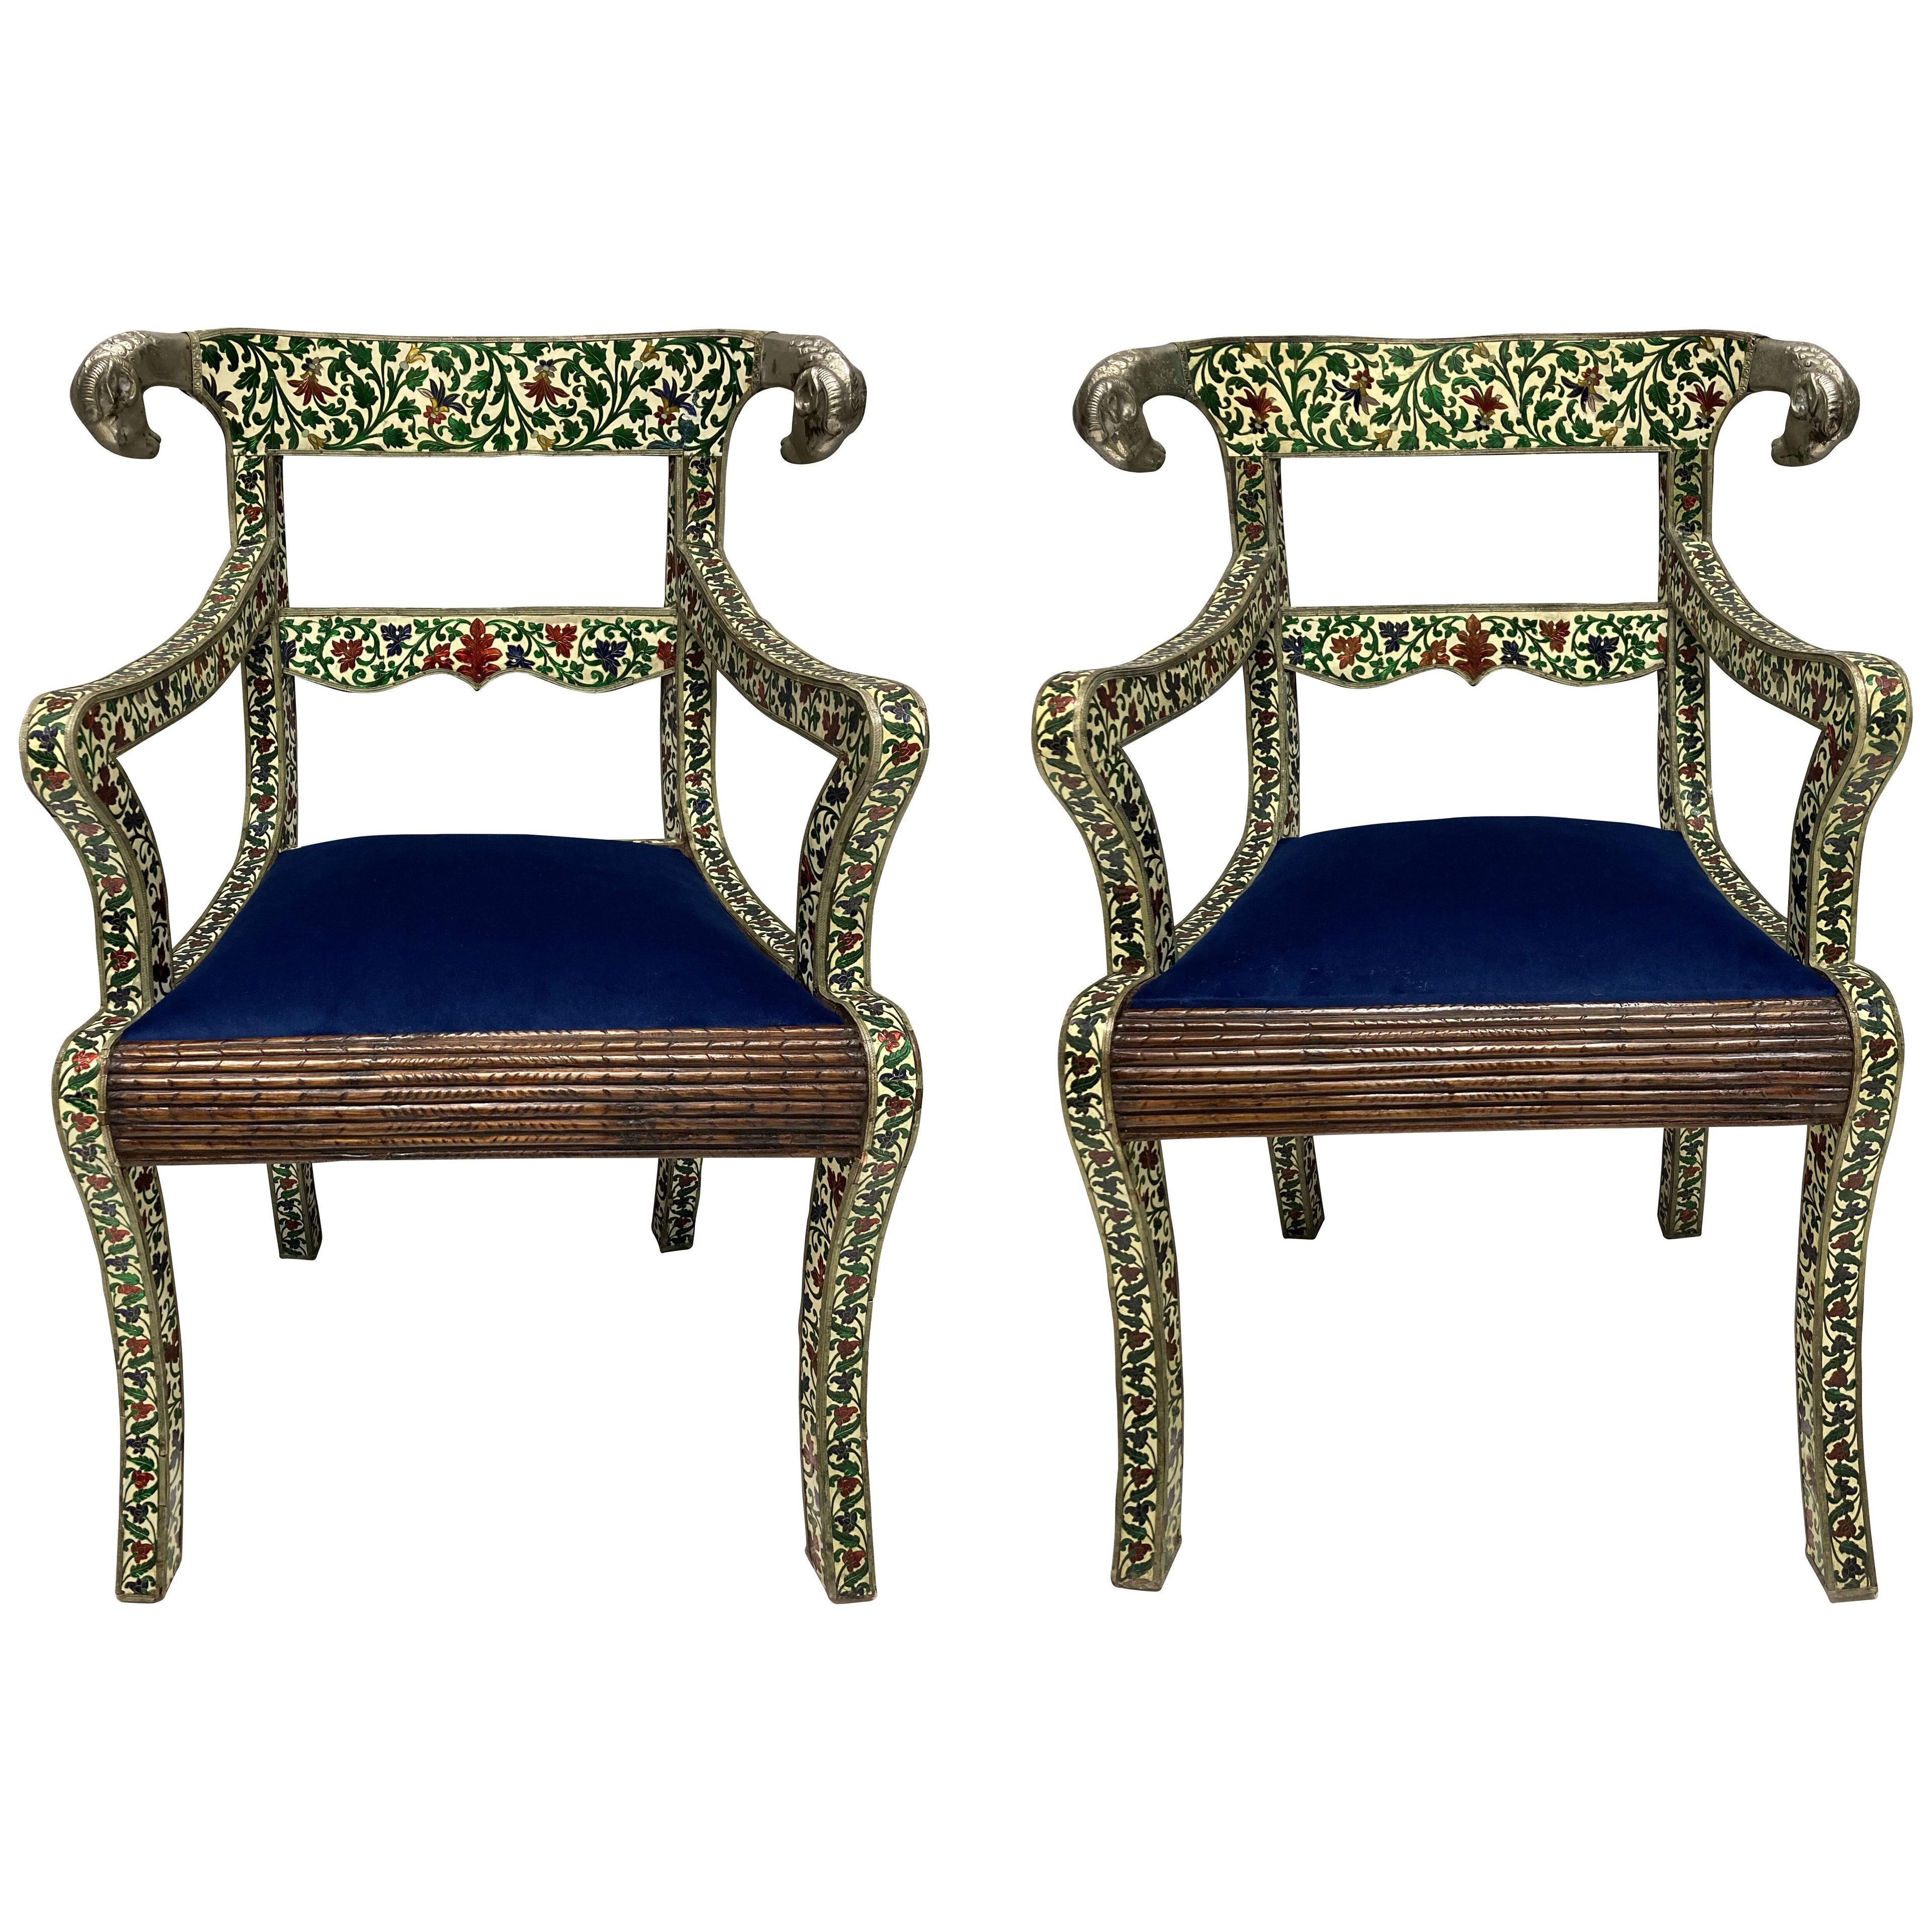 A PAIR OF RARE INDIAN CLOISONNE ARMCHAIRS